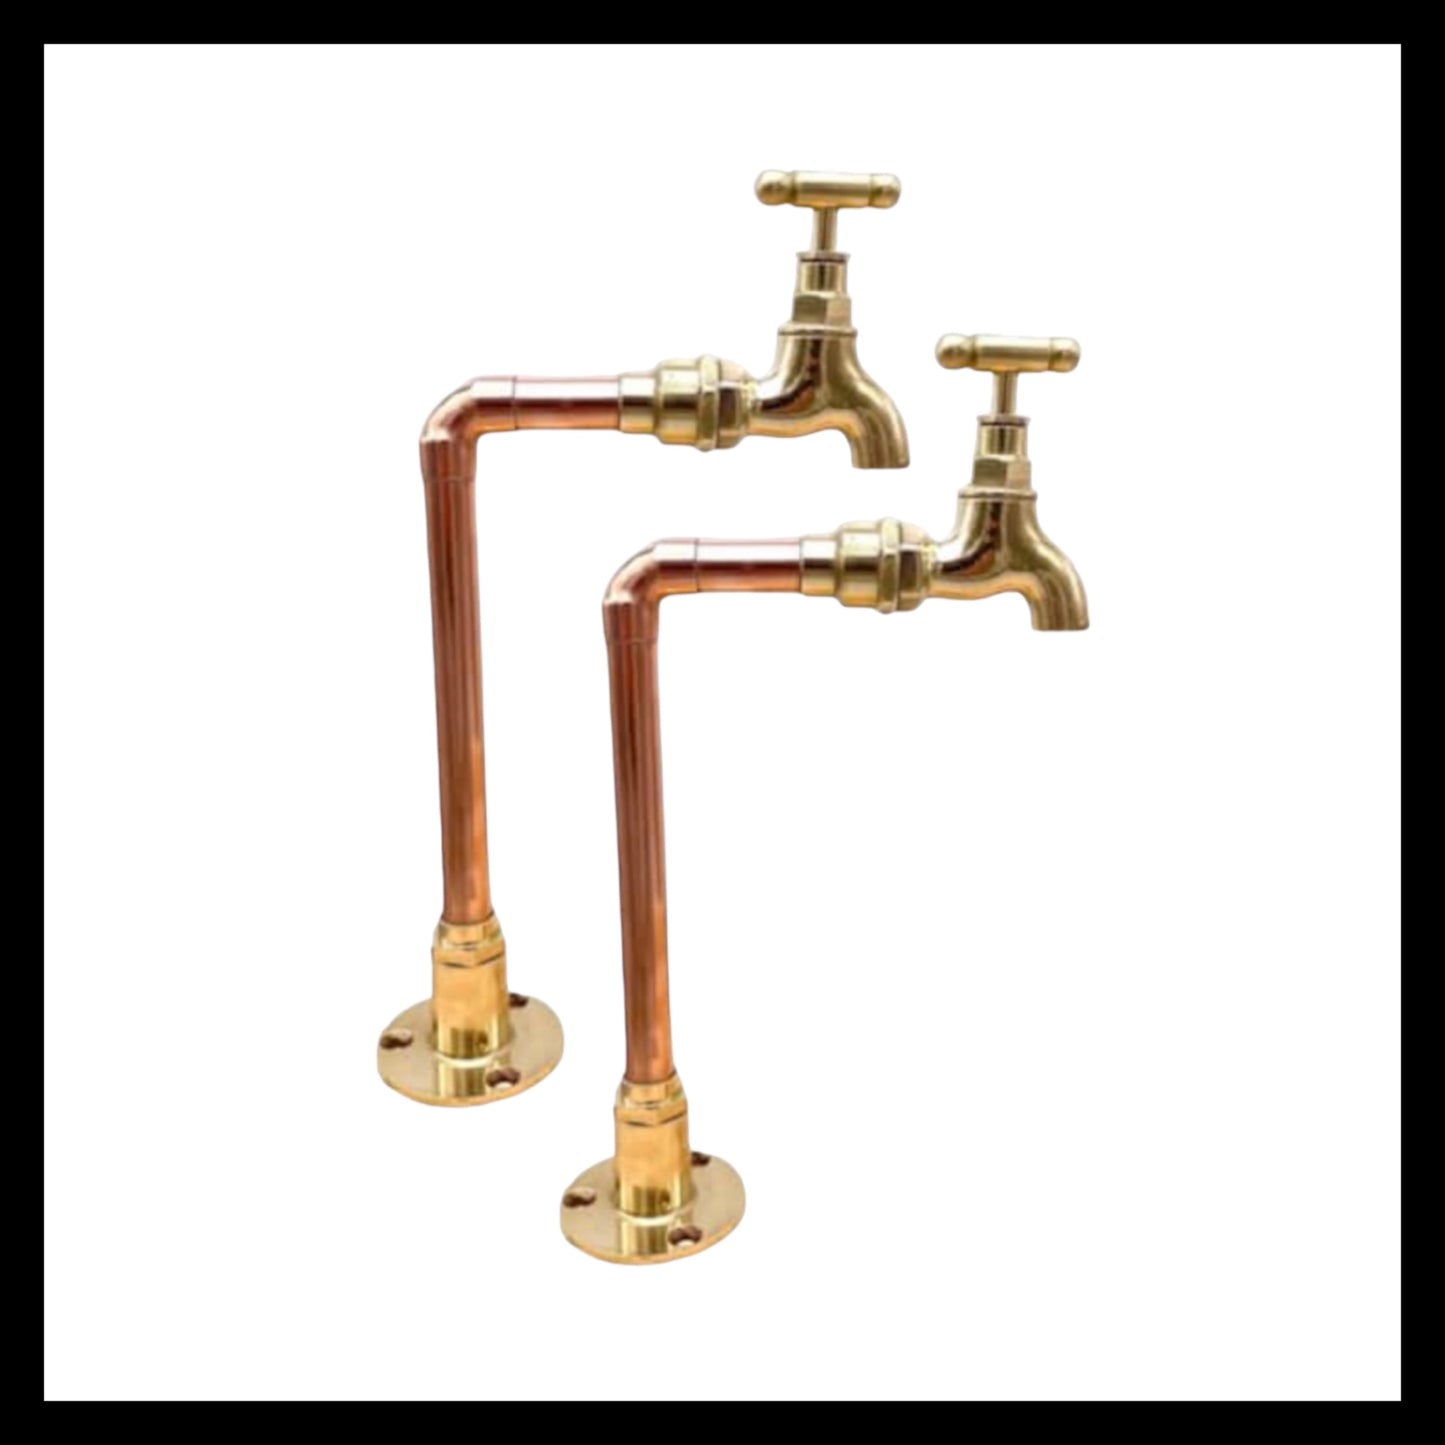 Pair of copper and brass handmade taps sold by All Things French Store